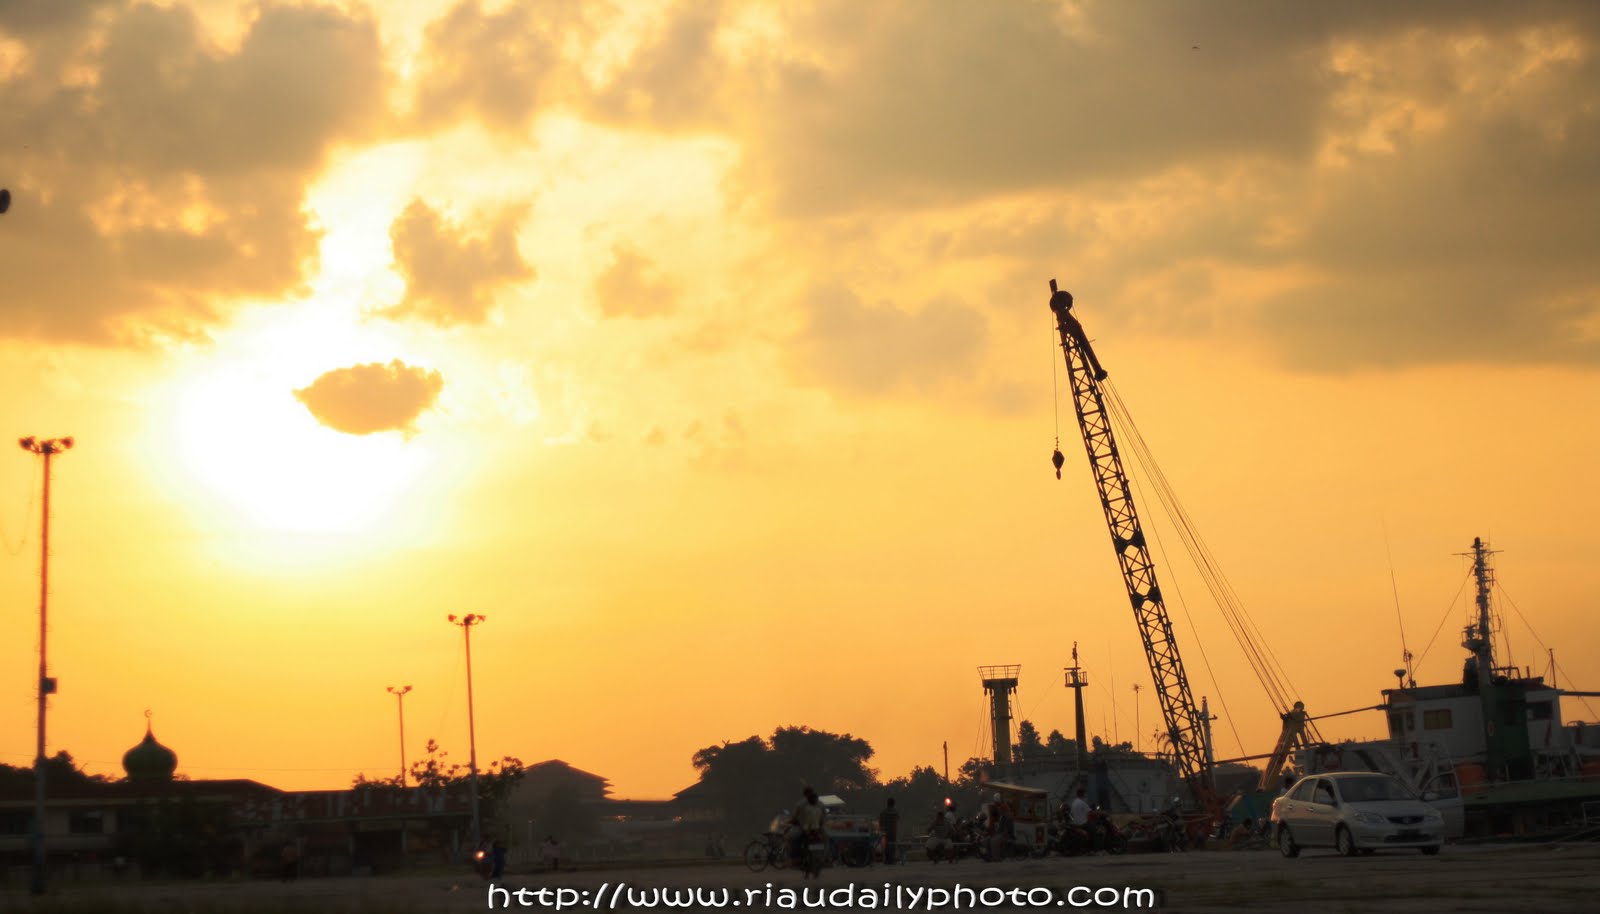 The atmosphere of sunset at the harbor  RIAU DAILY PHOTO